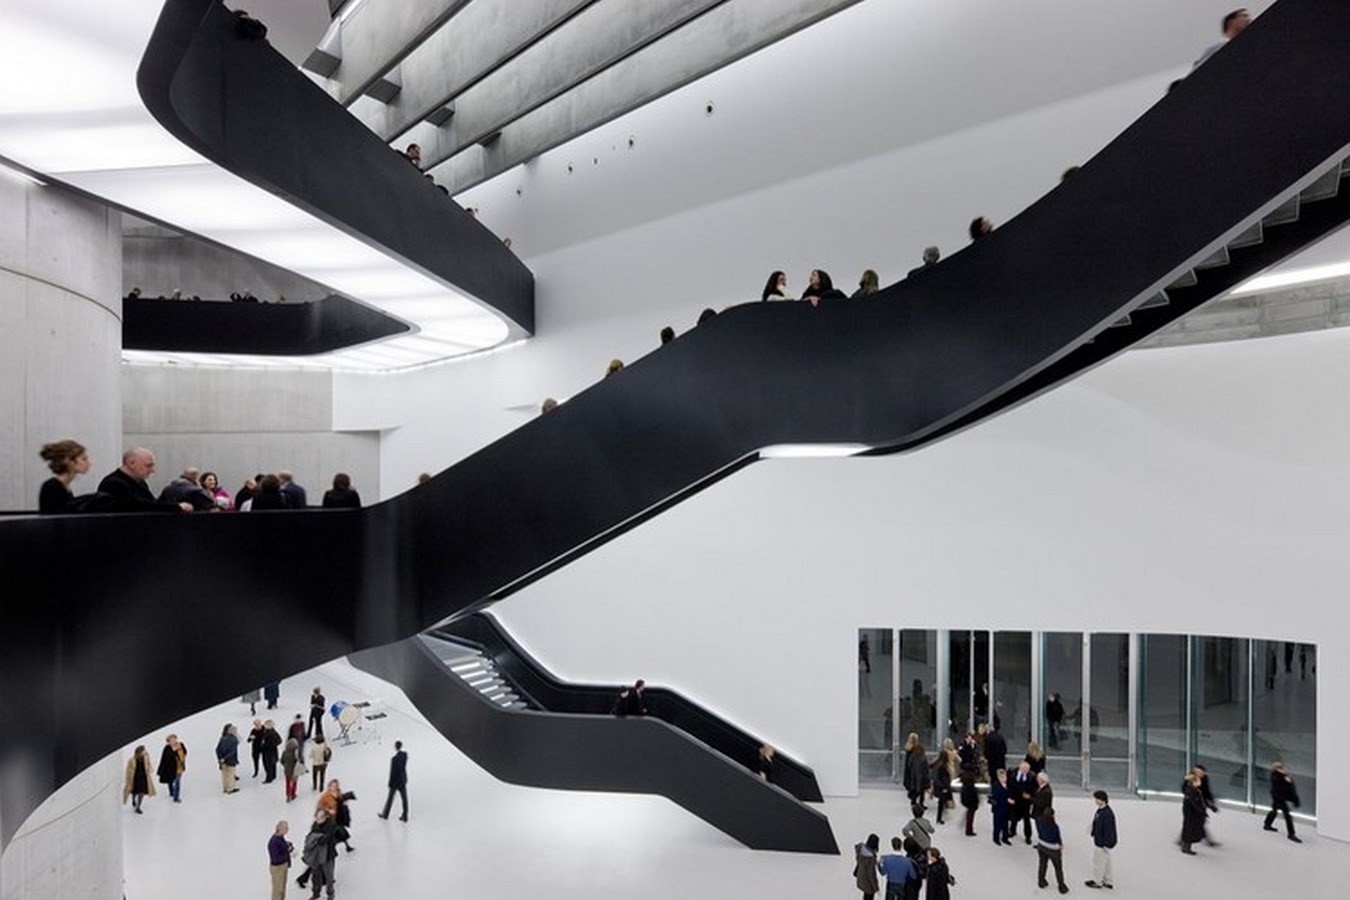 Sculptural steel staircase in MAXXI Museum of Contemporary Art in Rome by Zaha Hadid - Sheet1